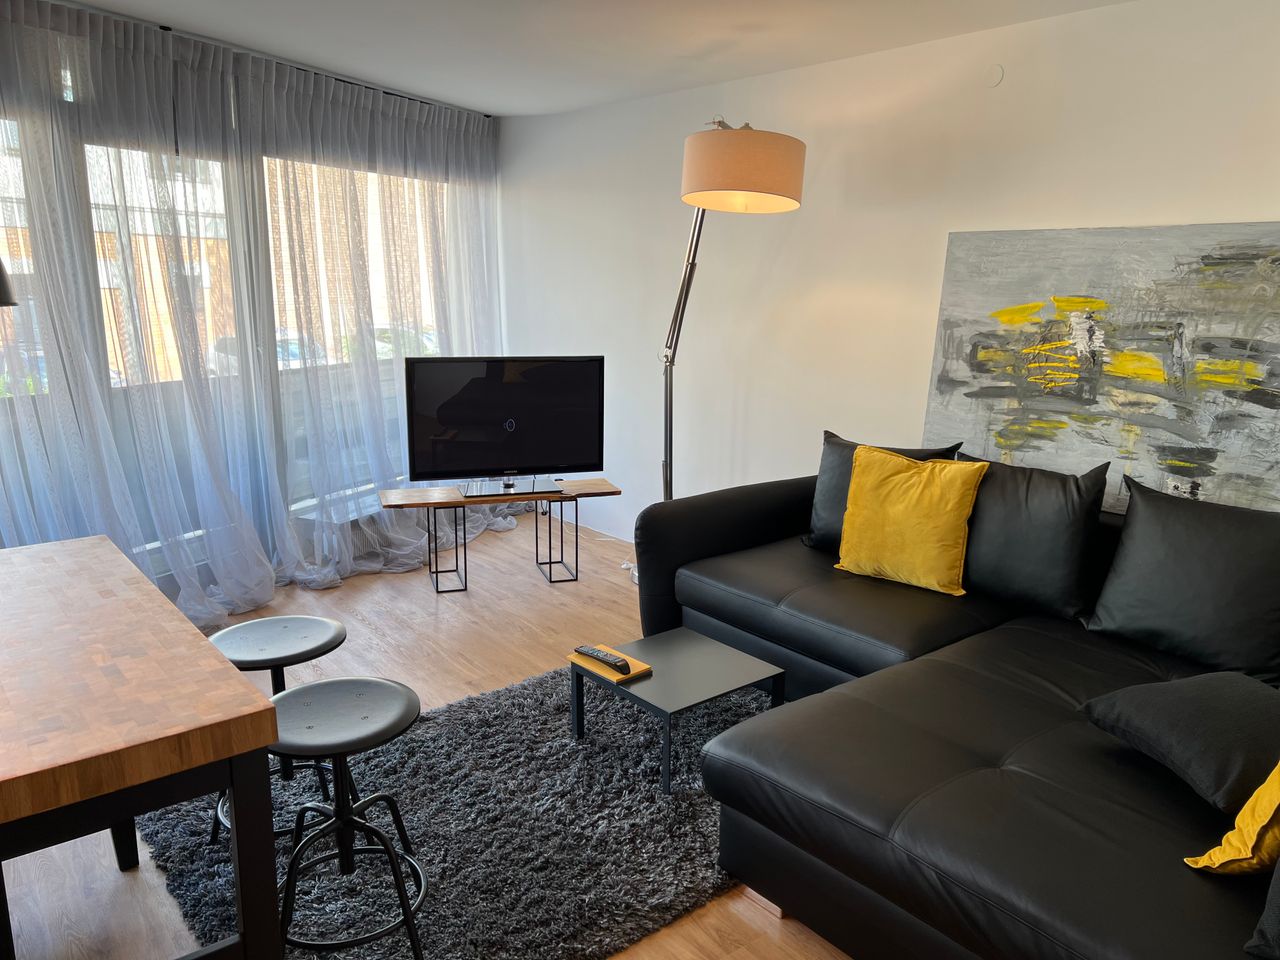 Bricht appartement in the middle of the city and absolutely quiet and ready to relax